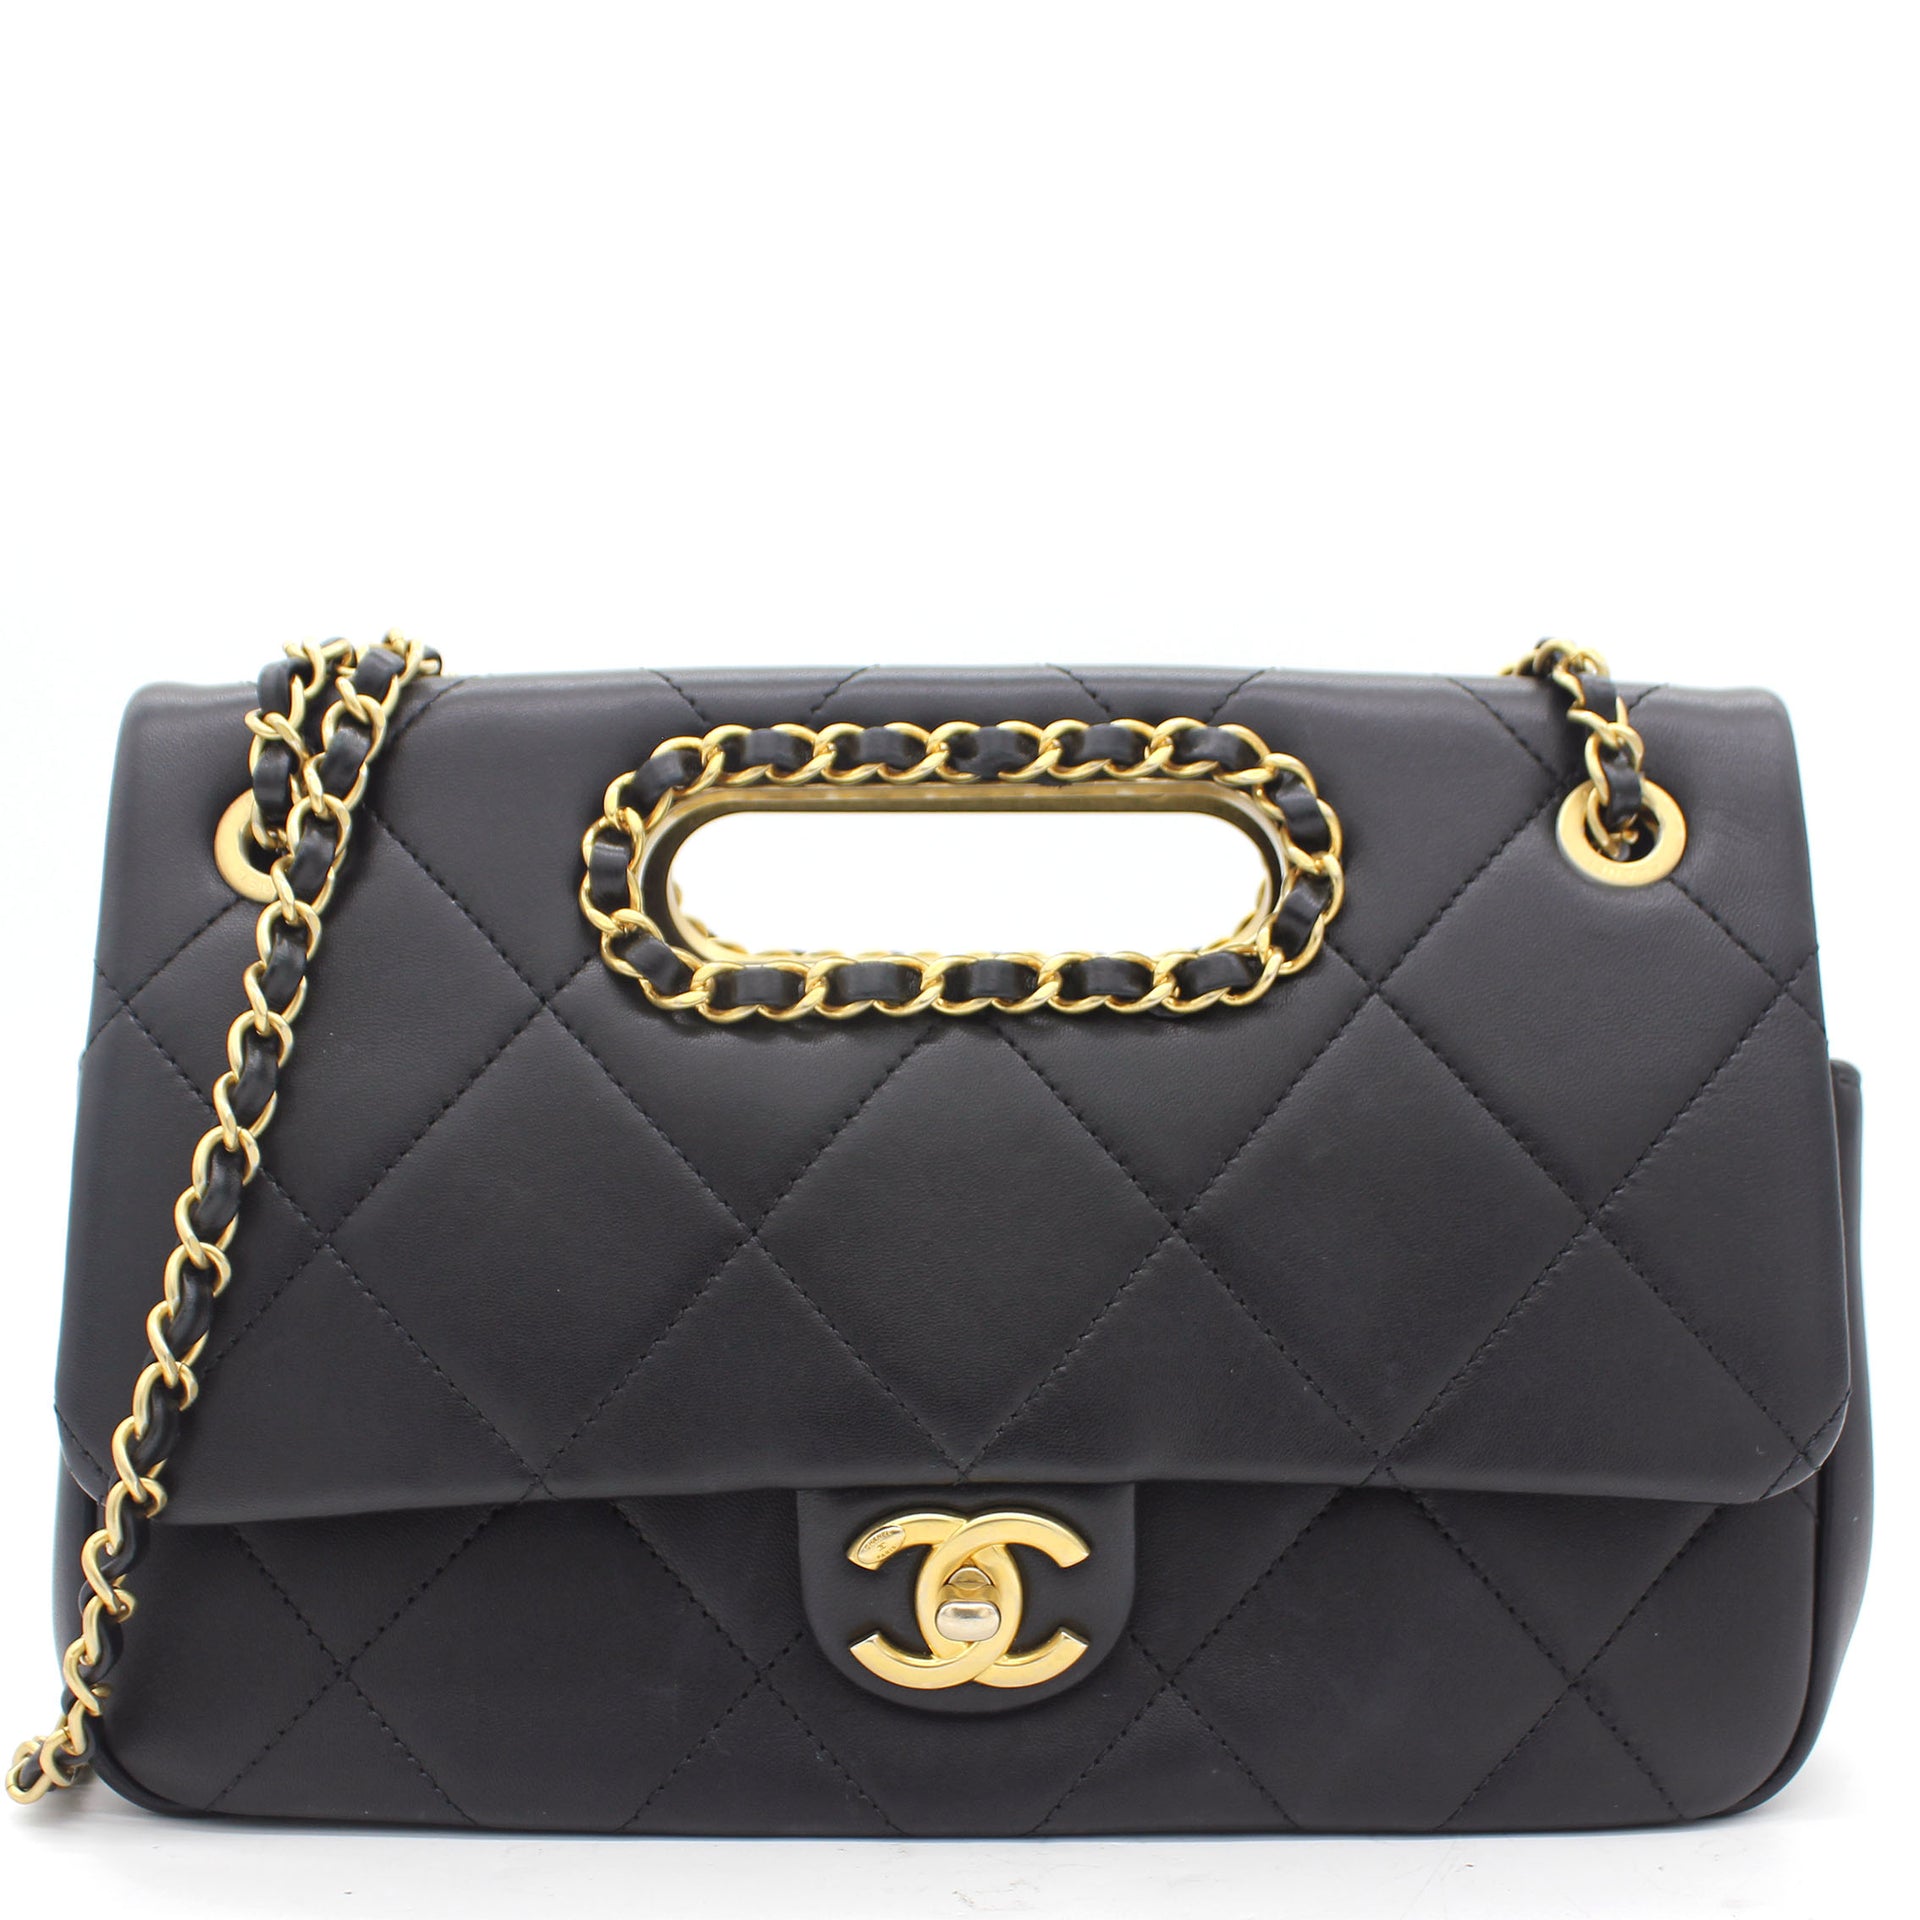 Chanel Black Quilted Smooth Calfskin Leather Jumbo Chain Detail